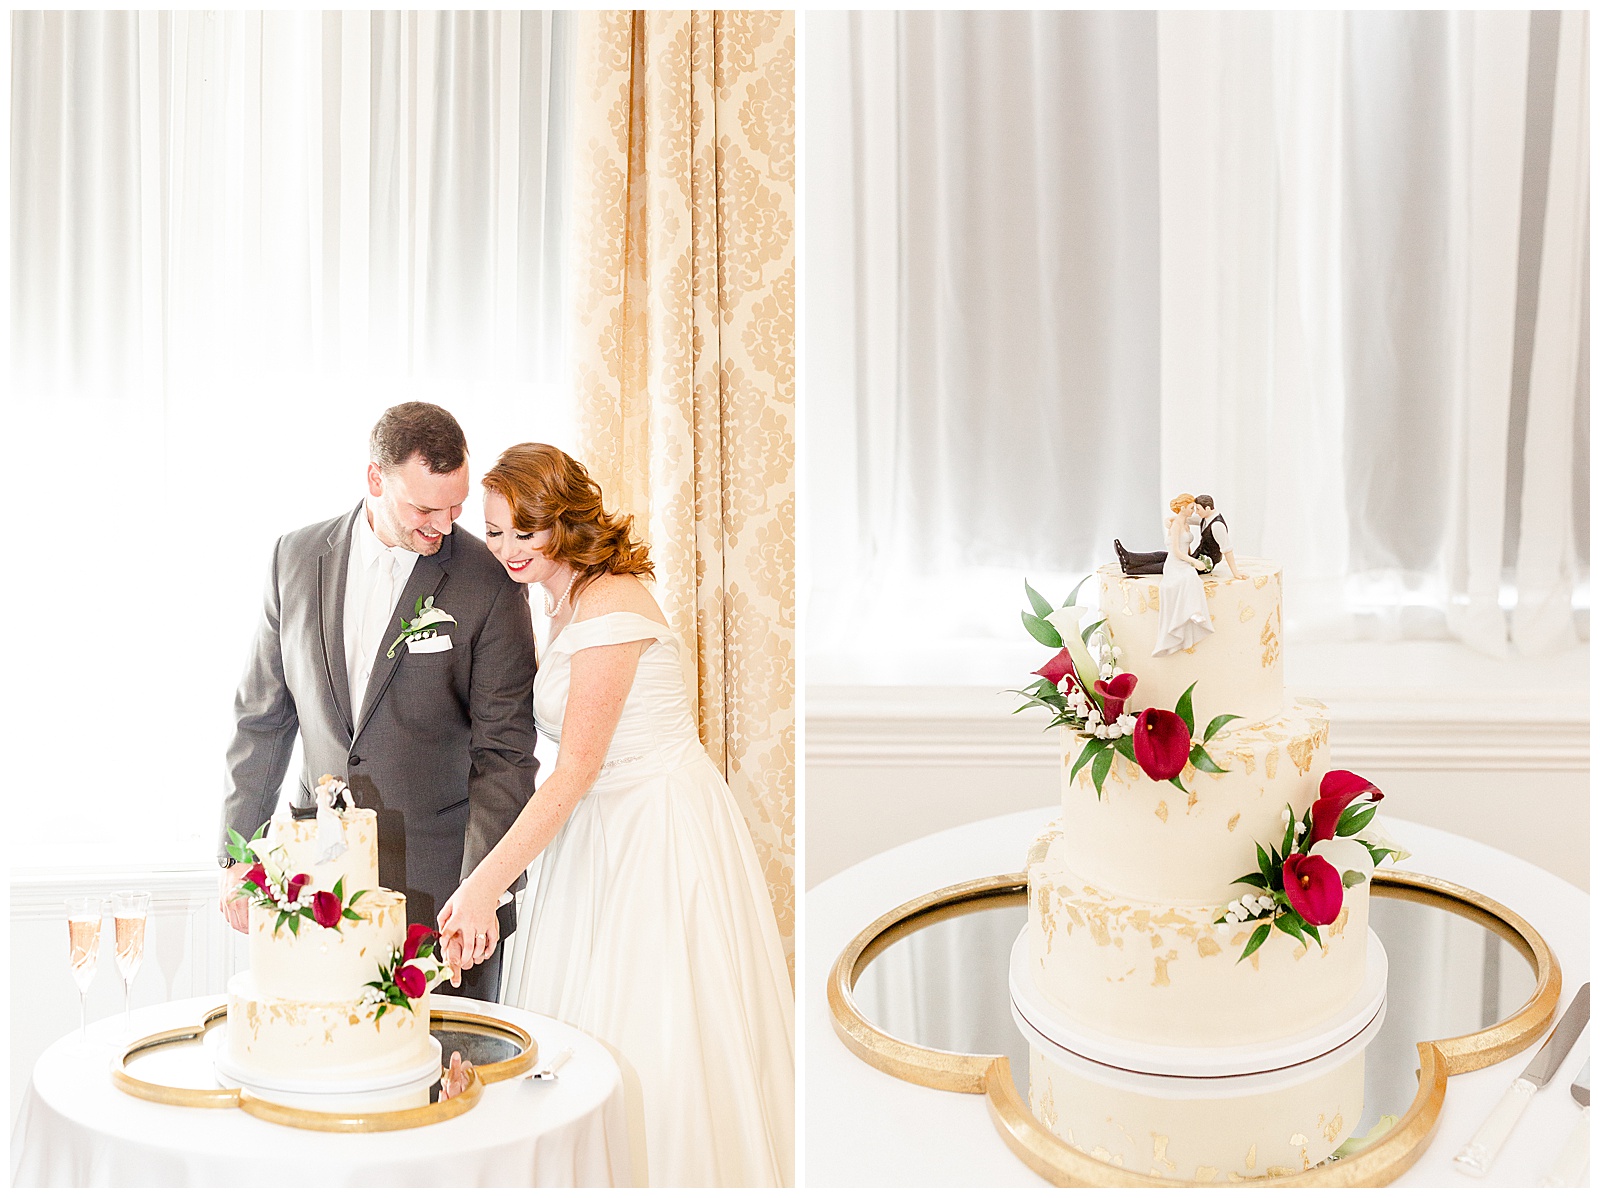 Gorgeous Red-Haired Bride and Groom cut the cake at Elegant 1940s Modern Vintage Wedding in Charlotte, NC | check out the full wedding at KevynDixonPhoto.com 